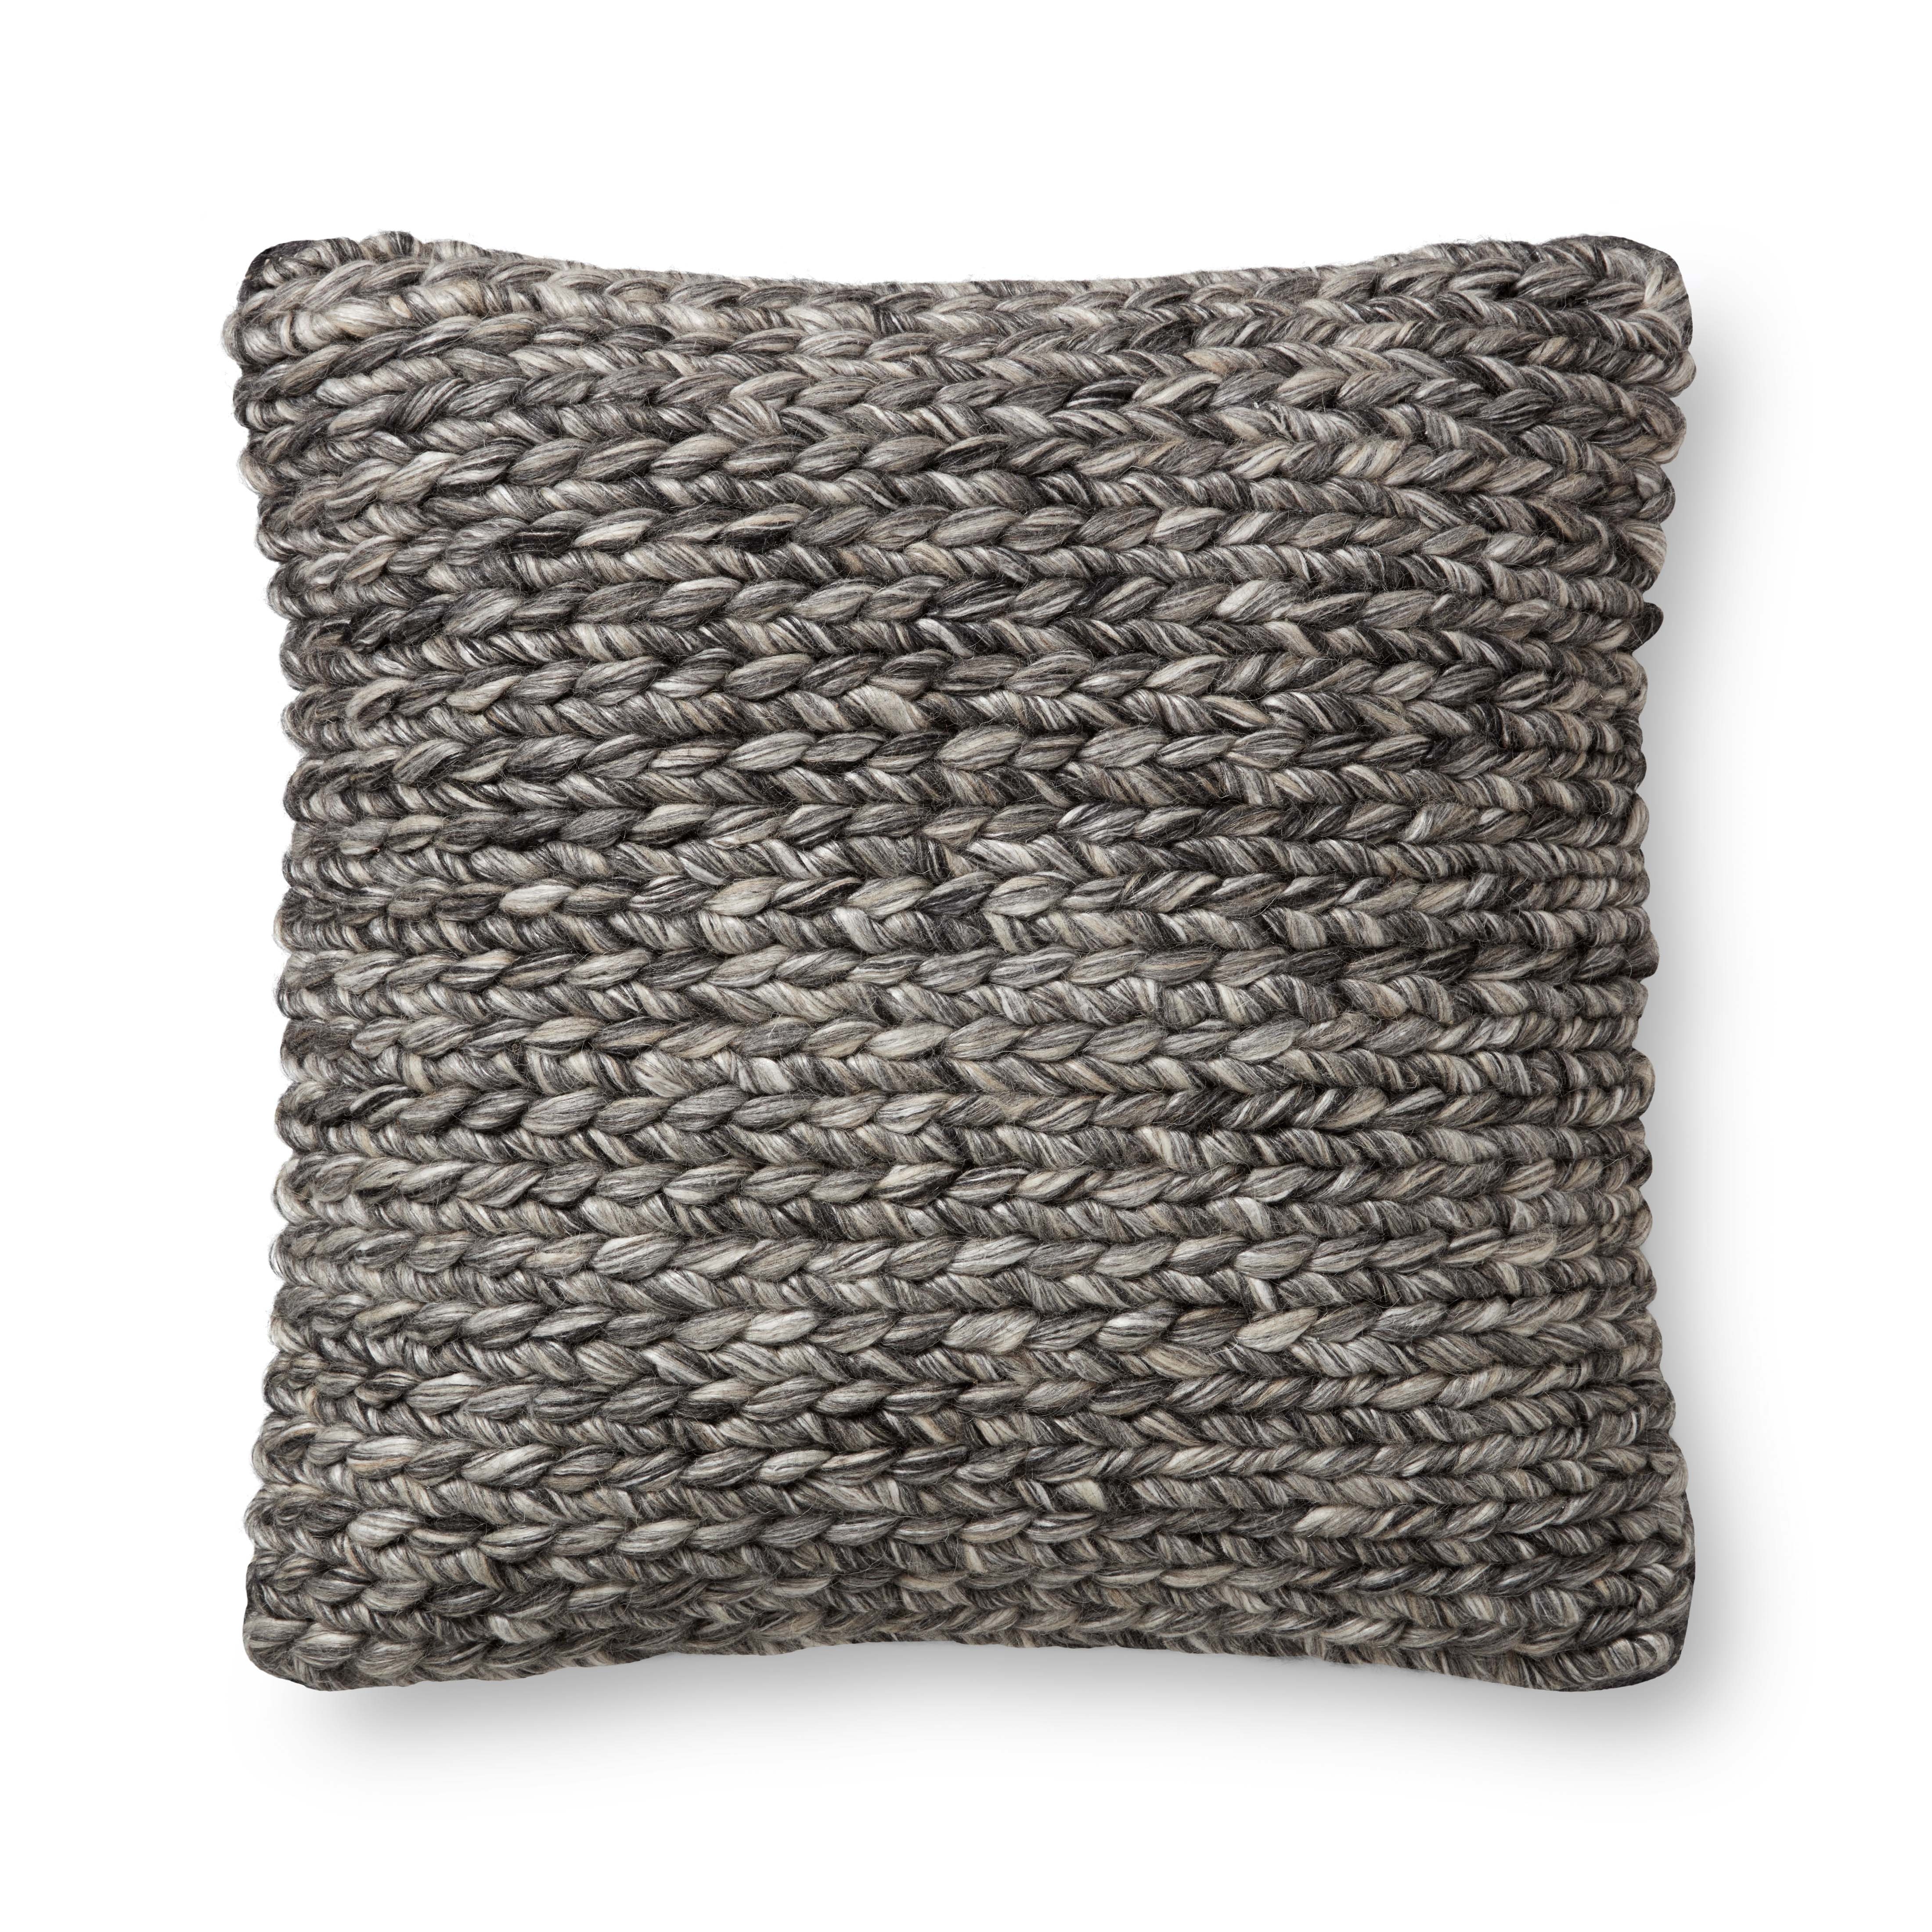 PILLOWS PED0004 CHARCOAL 22" x 22" Cover Only - Image 0